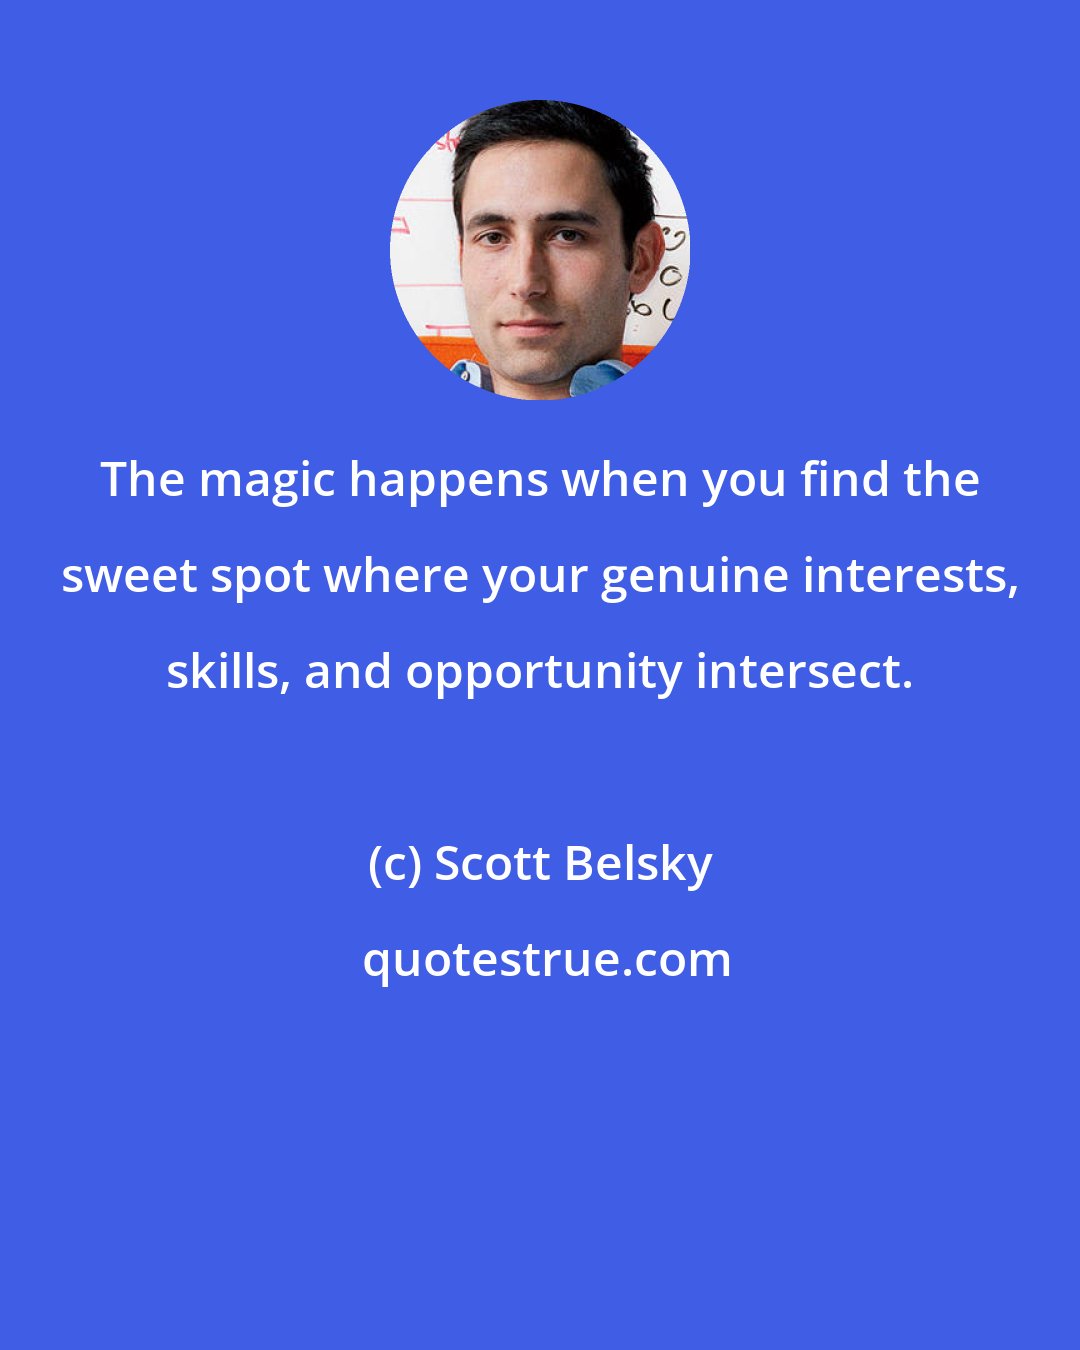 Scott Belsky: The magic happens when you find the sweet spot where your genuine interests, skills, and opportunity intersect.